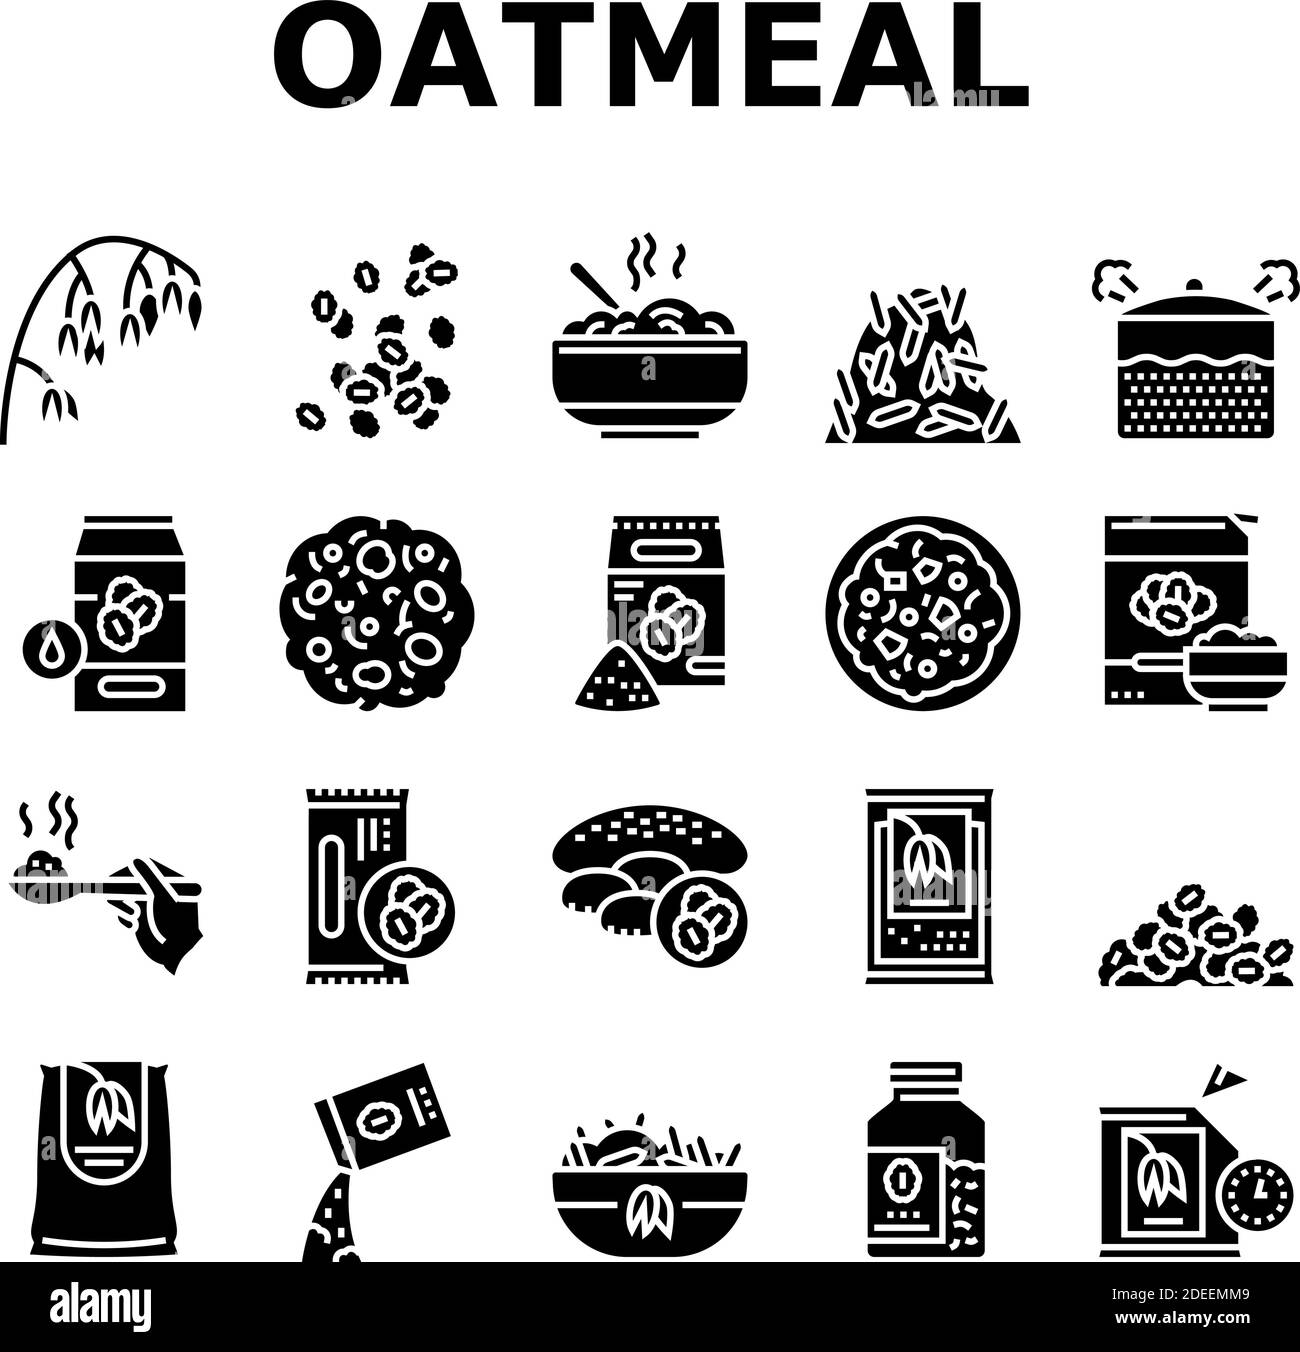 Oatmeal Nutrition Collection Icons Set Vector Stock Vector